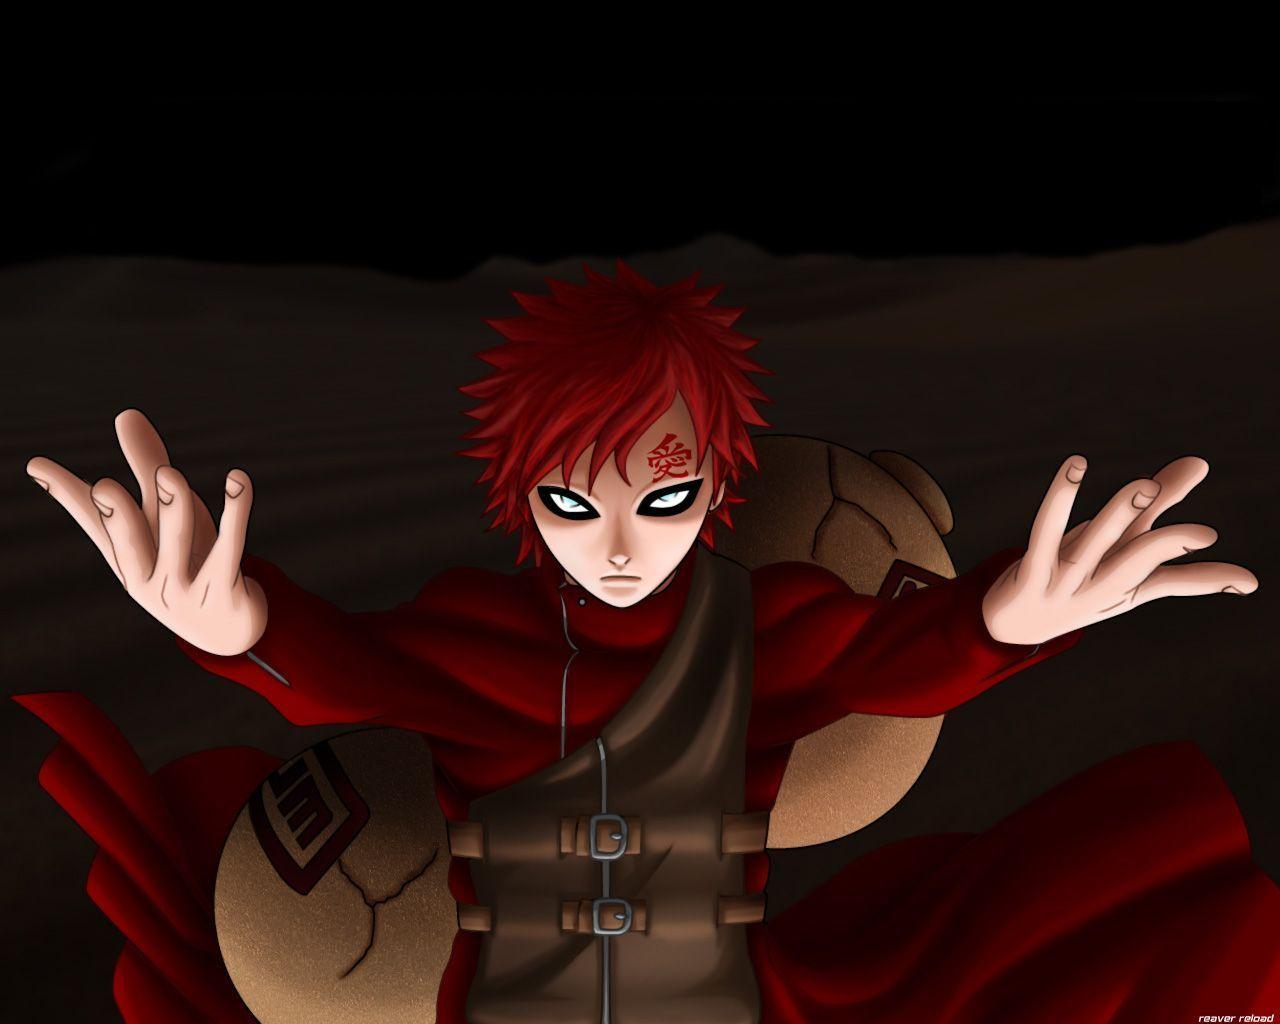 image For > Gaara Of The Sand Shippuden